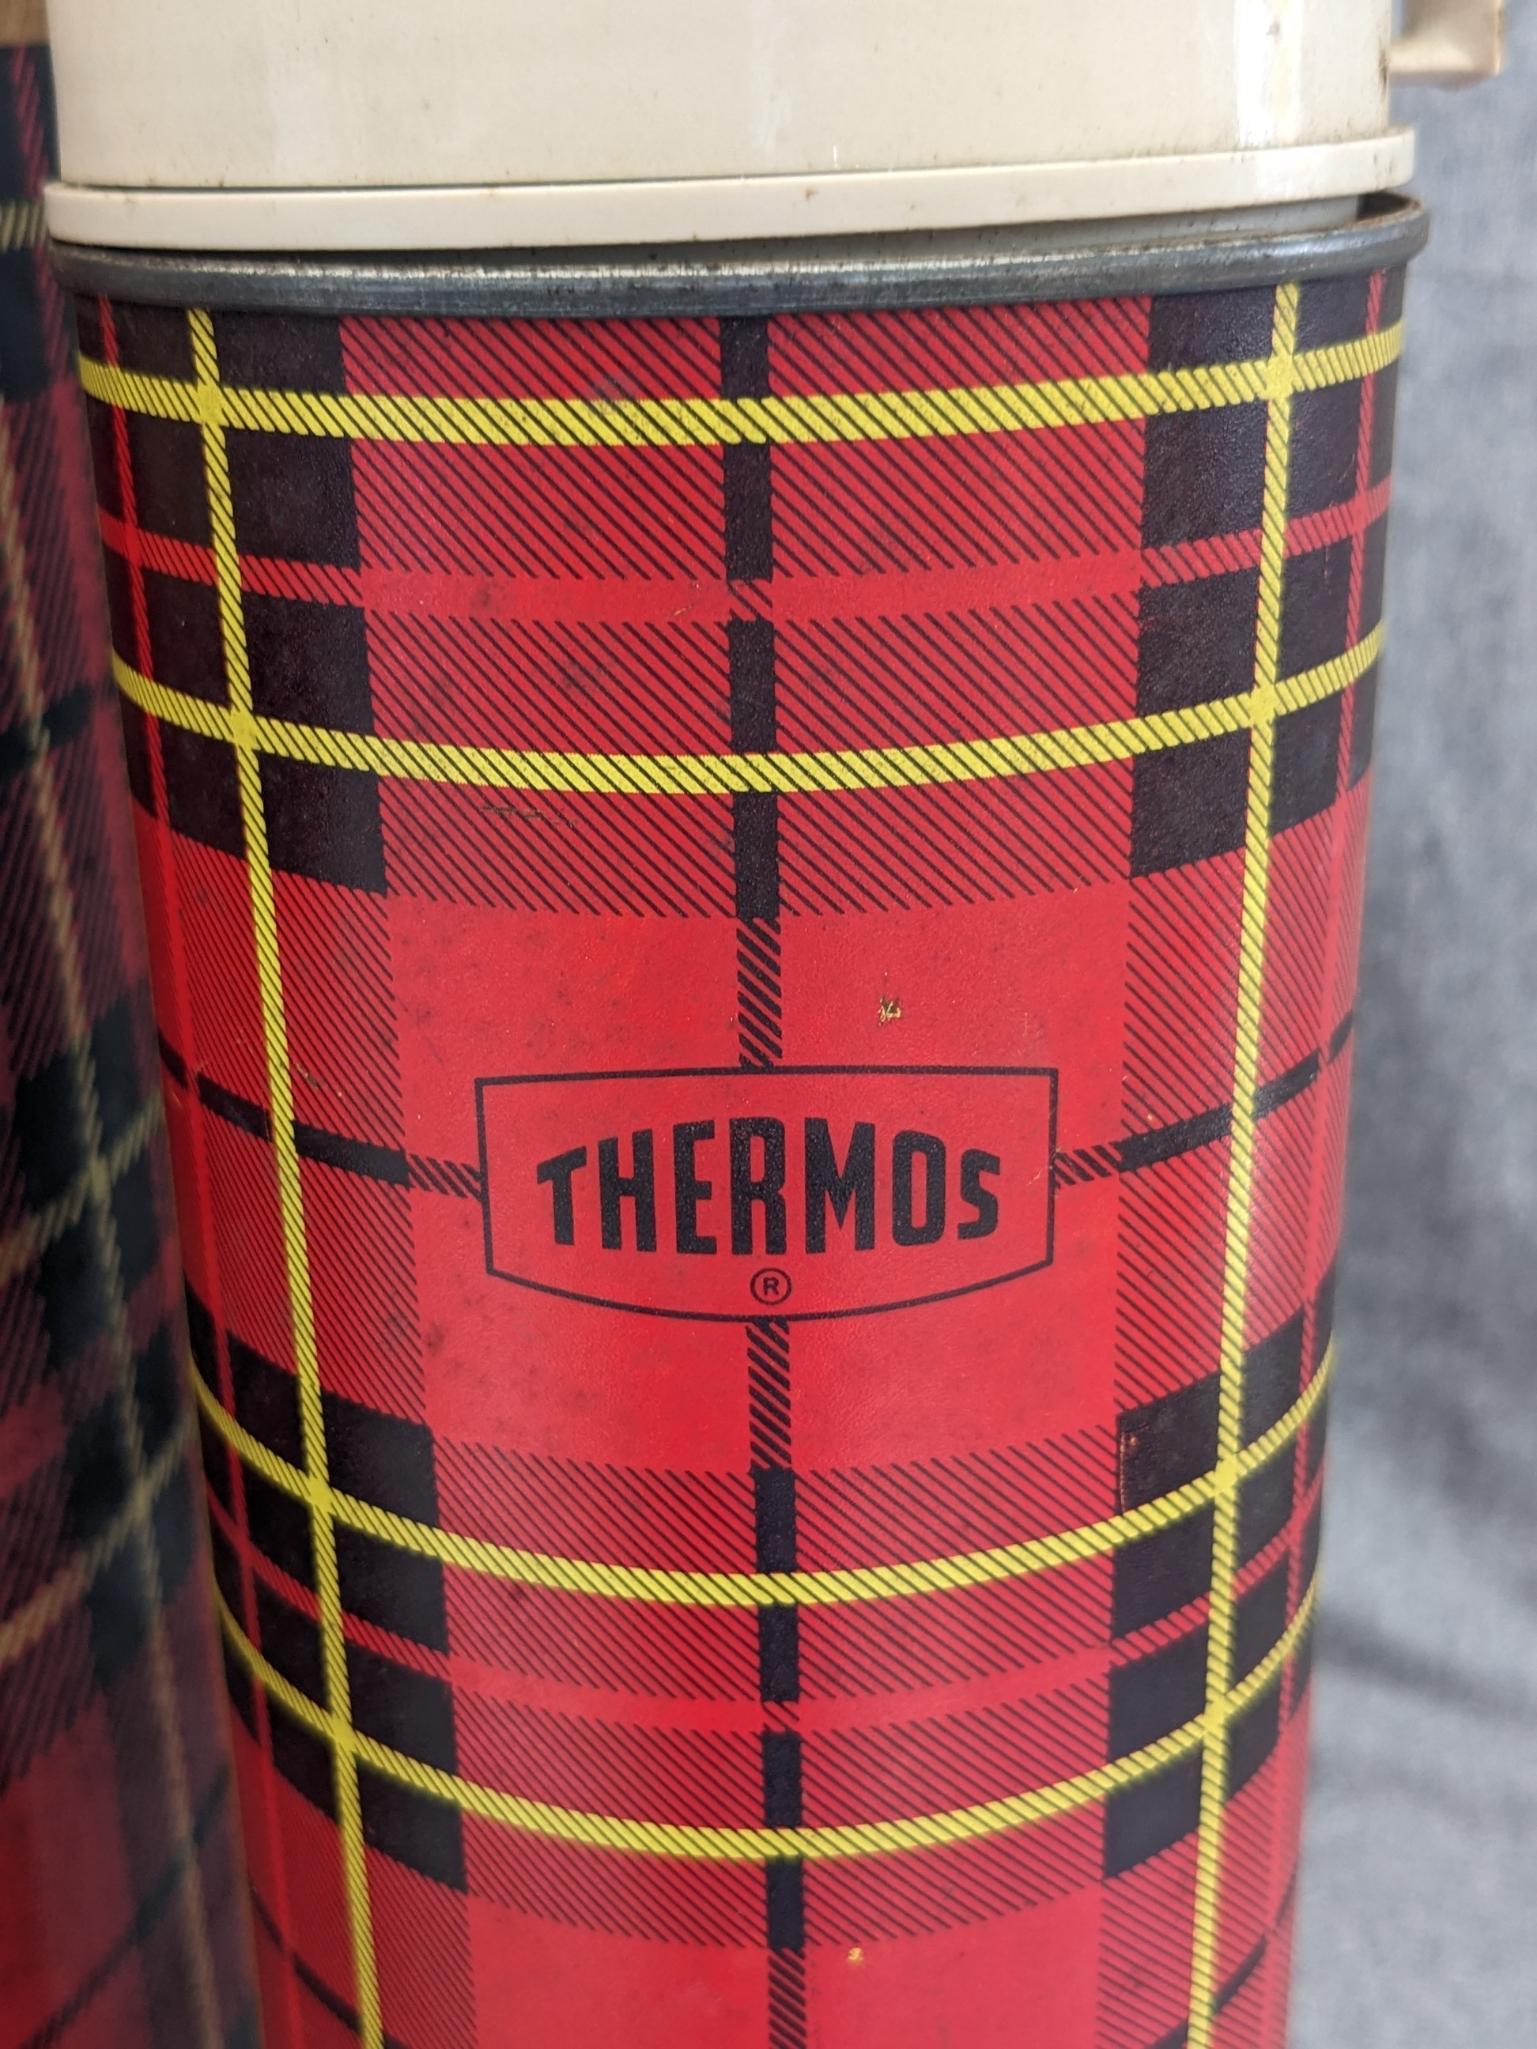 Vintage Thermos brand drink carrier and a